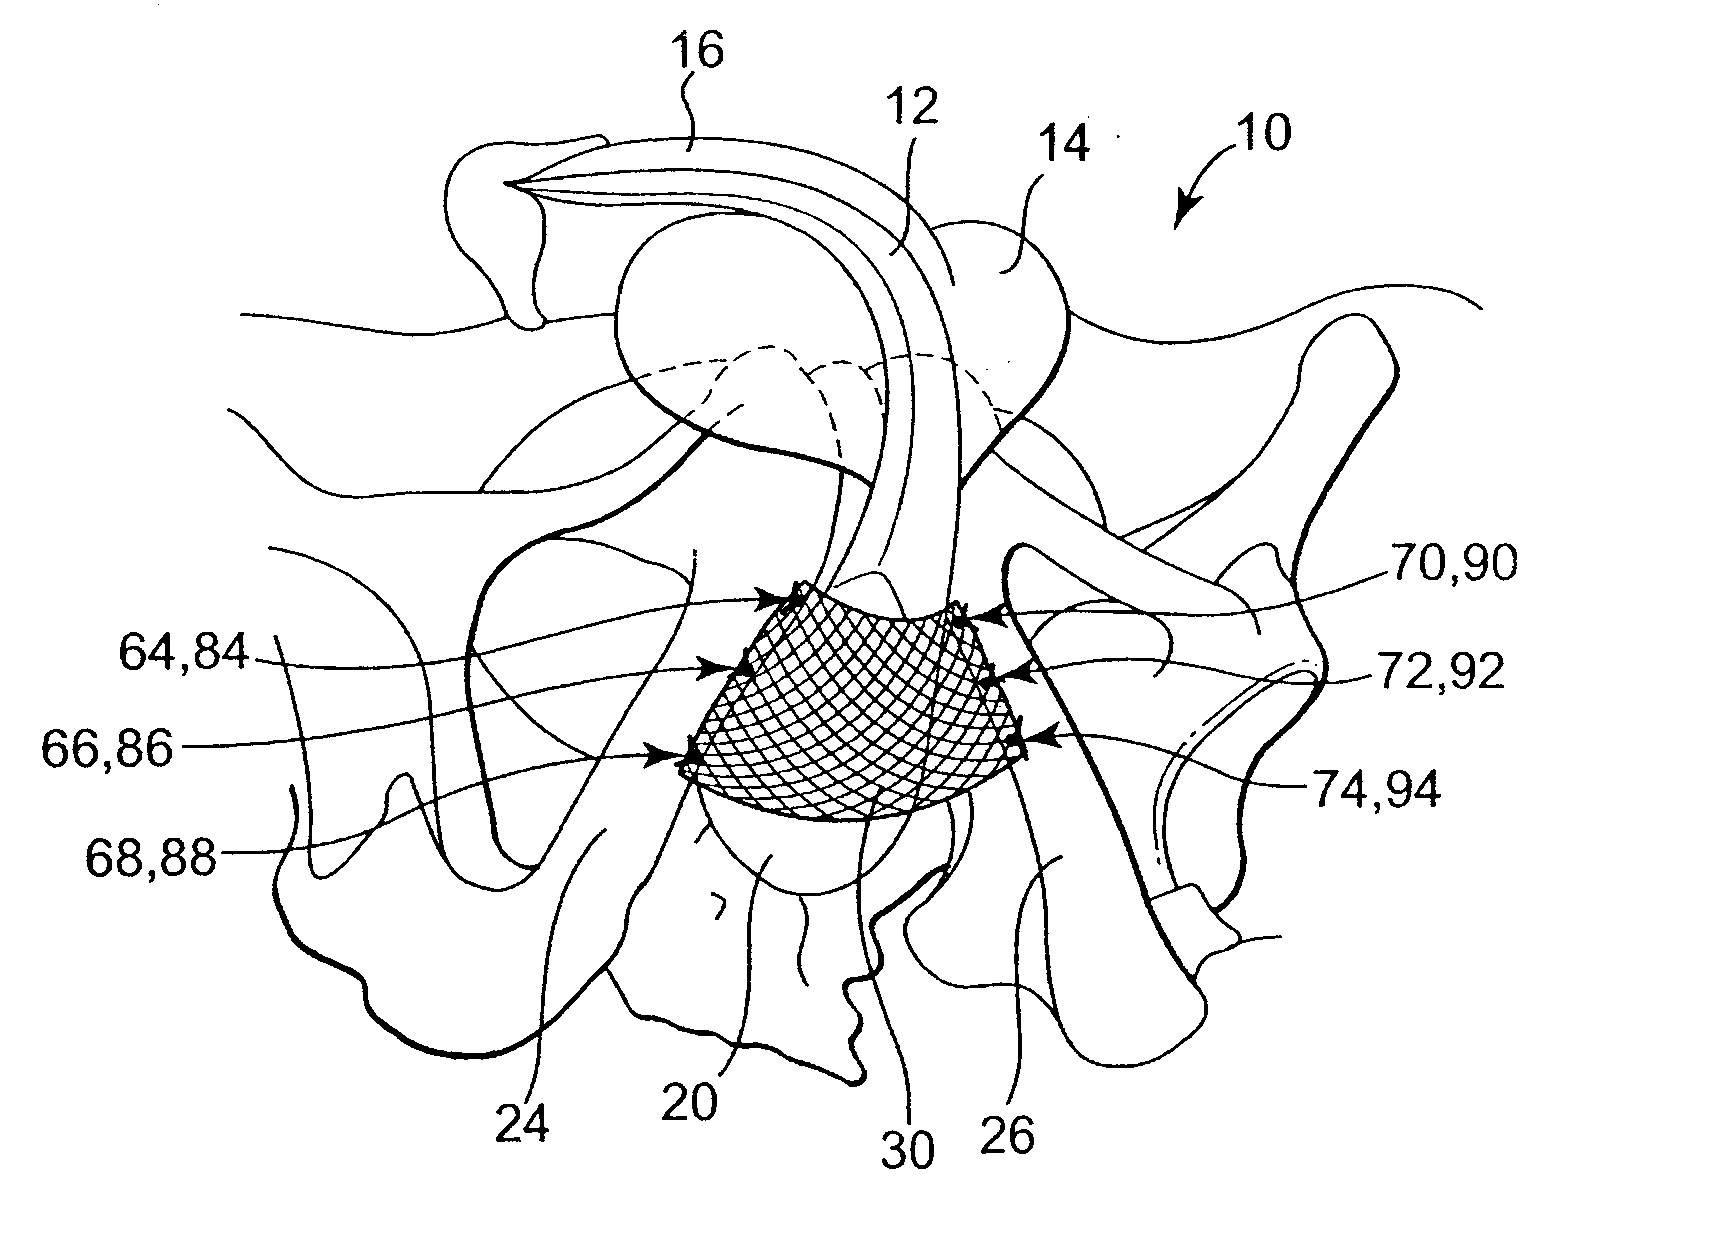 Methods and Apparatus for Securing and Tensioning a Urethral Sling to Pubic Bone